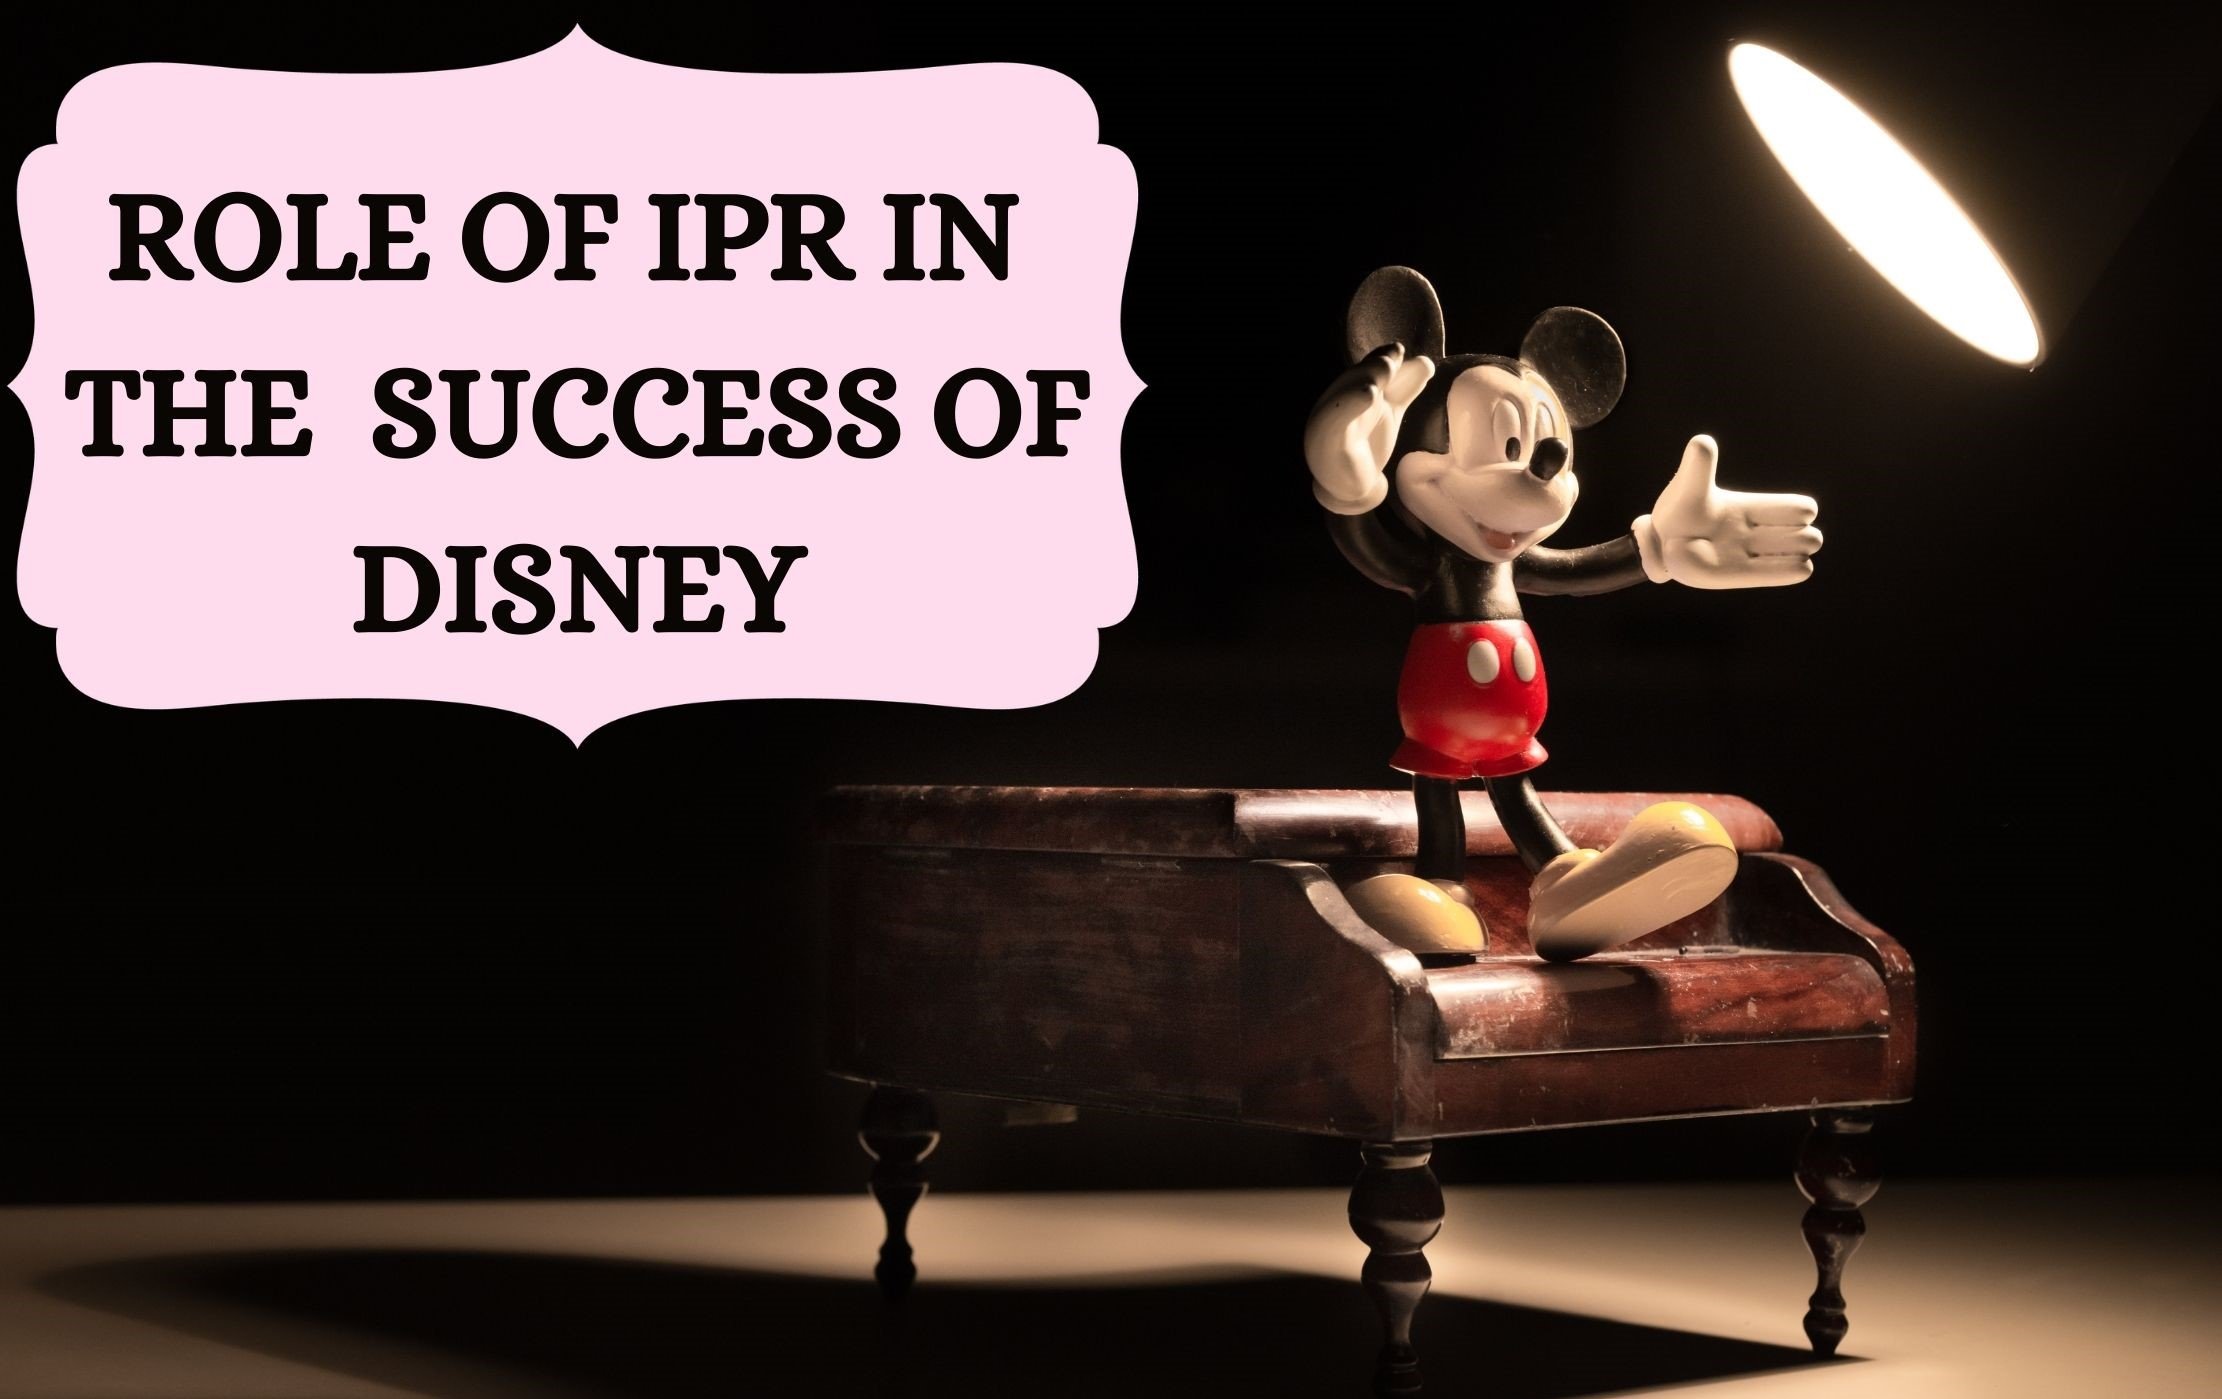 ROLE OF IPR IN THE SUCCESS OF DISNEY